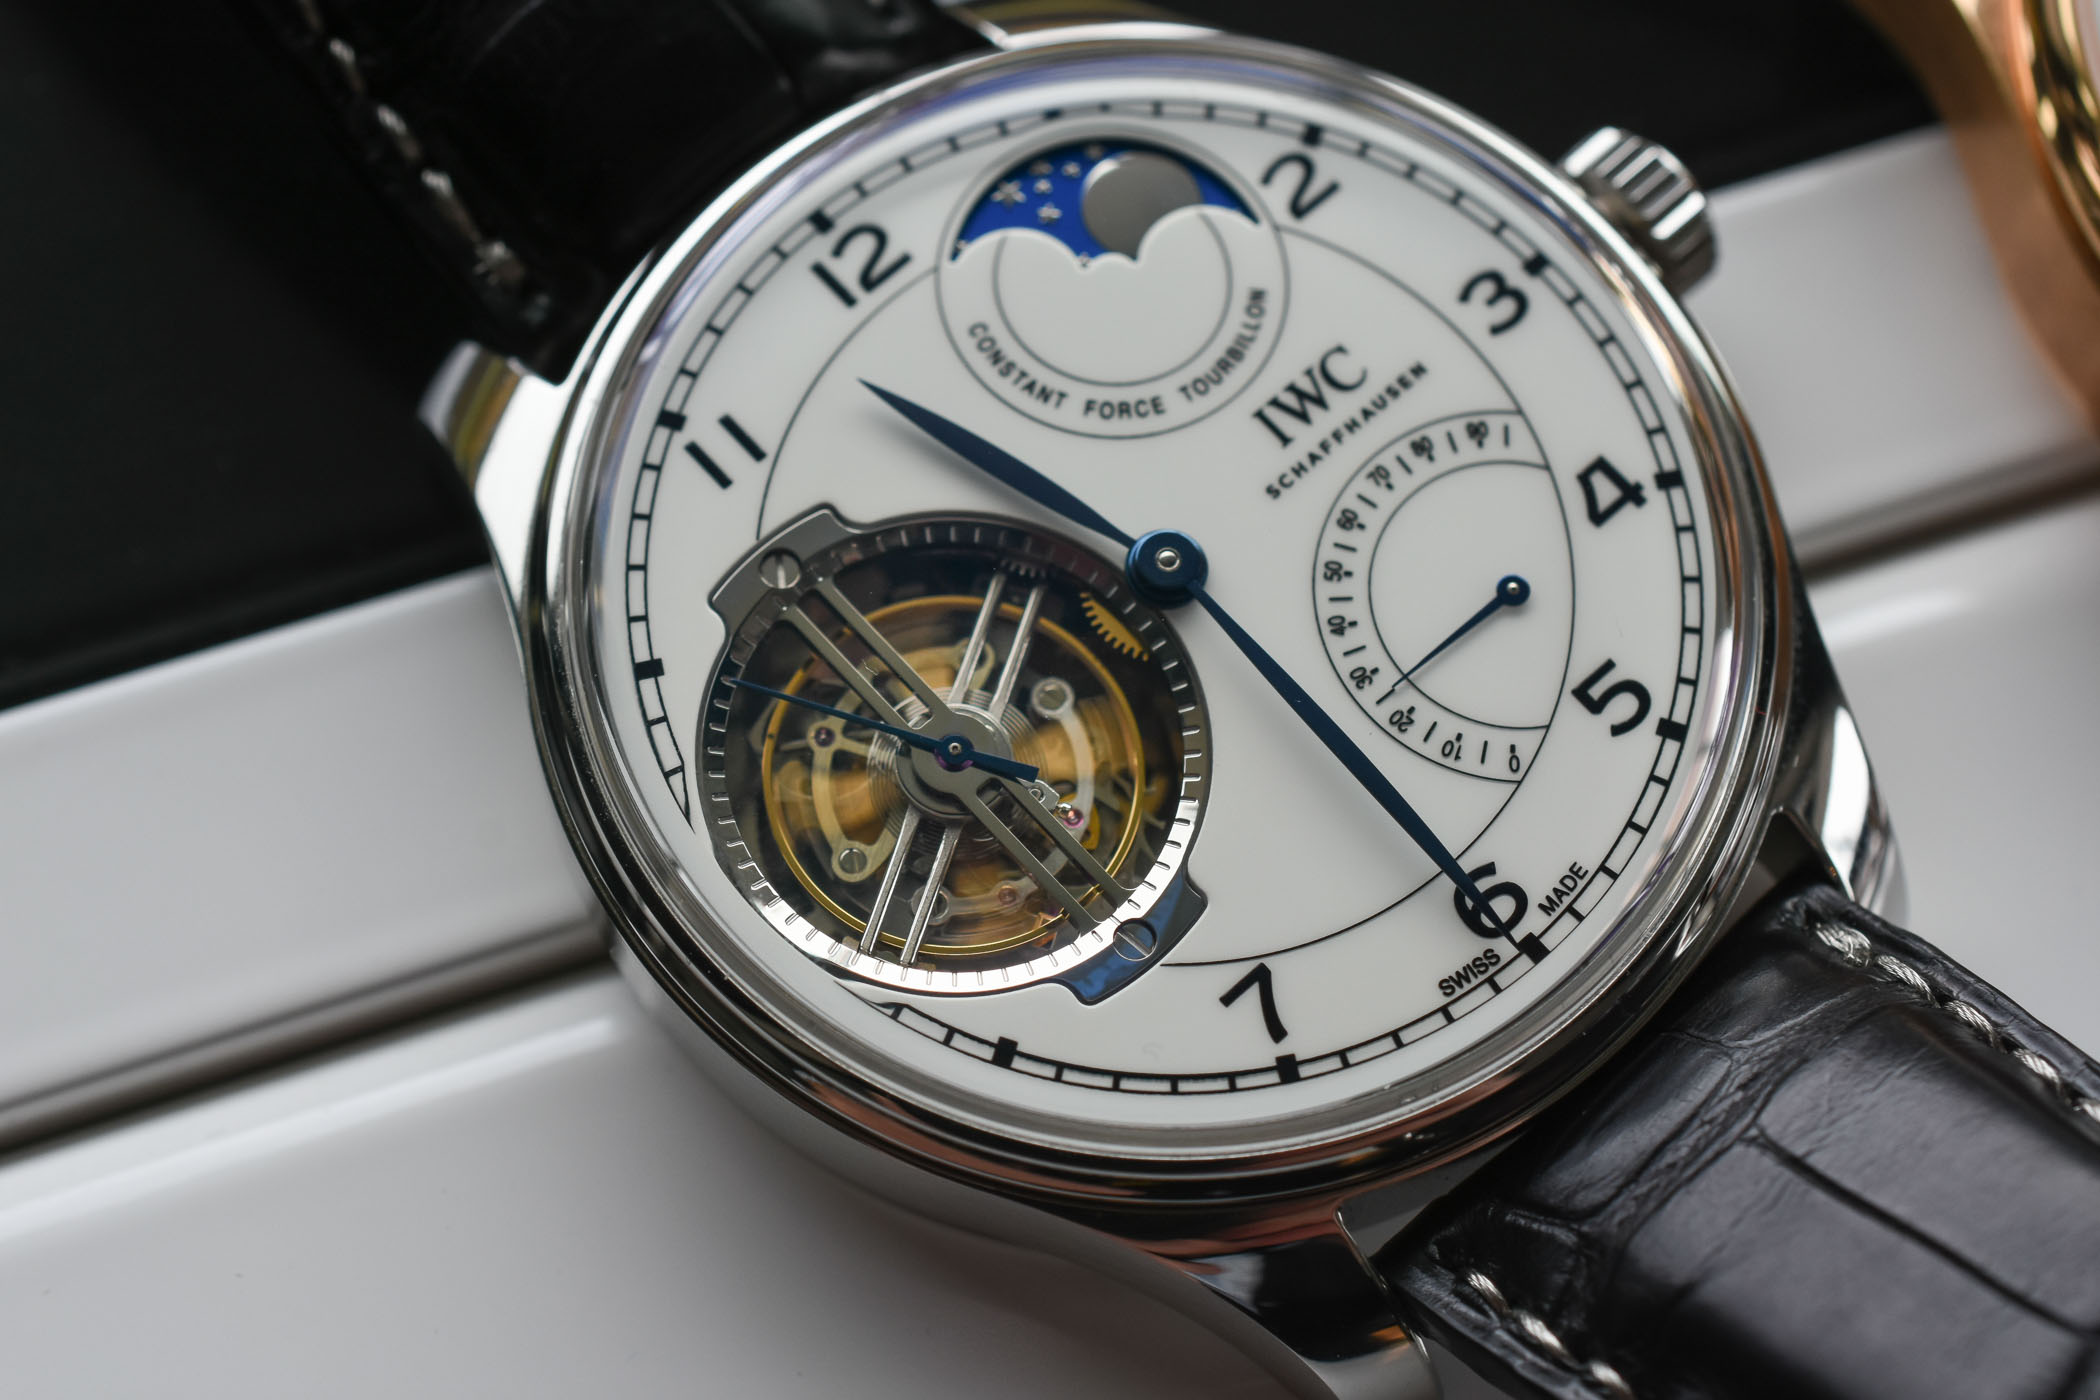 IWC Portugieser Constant Force Tourbillon Edition 150 years Pre-SIHH 2018